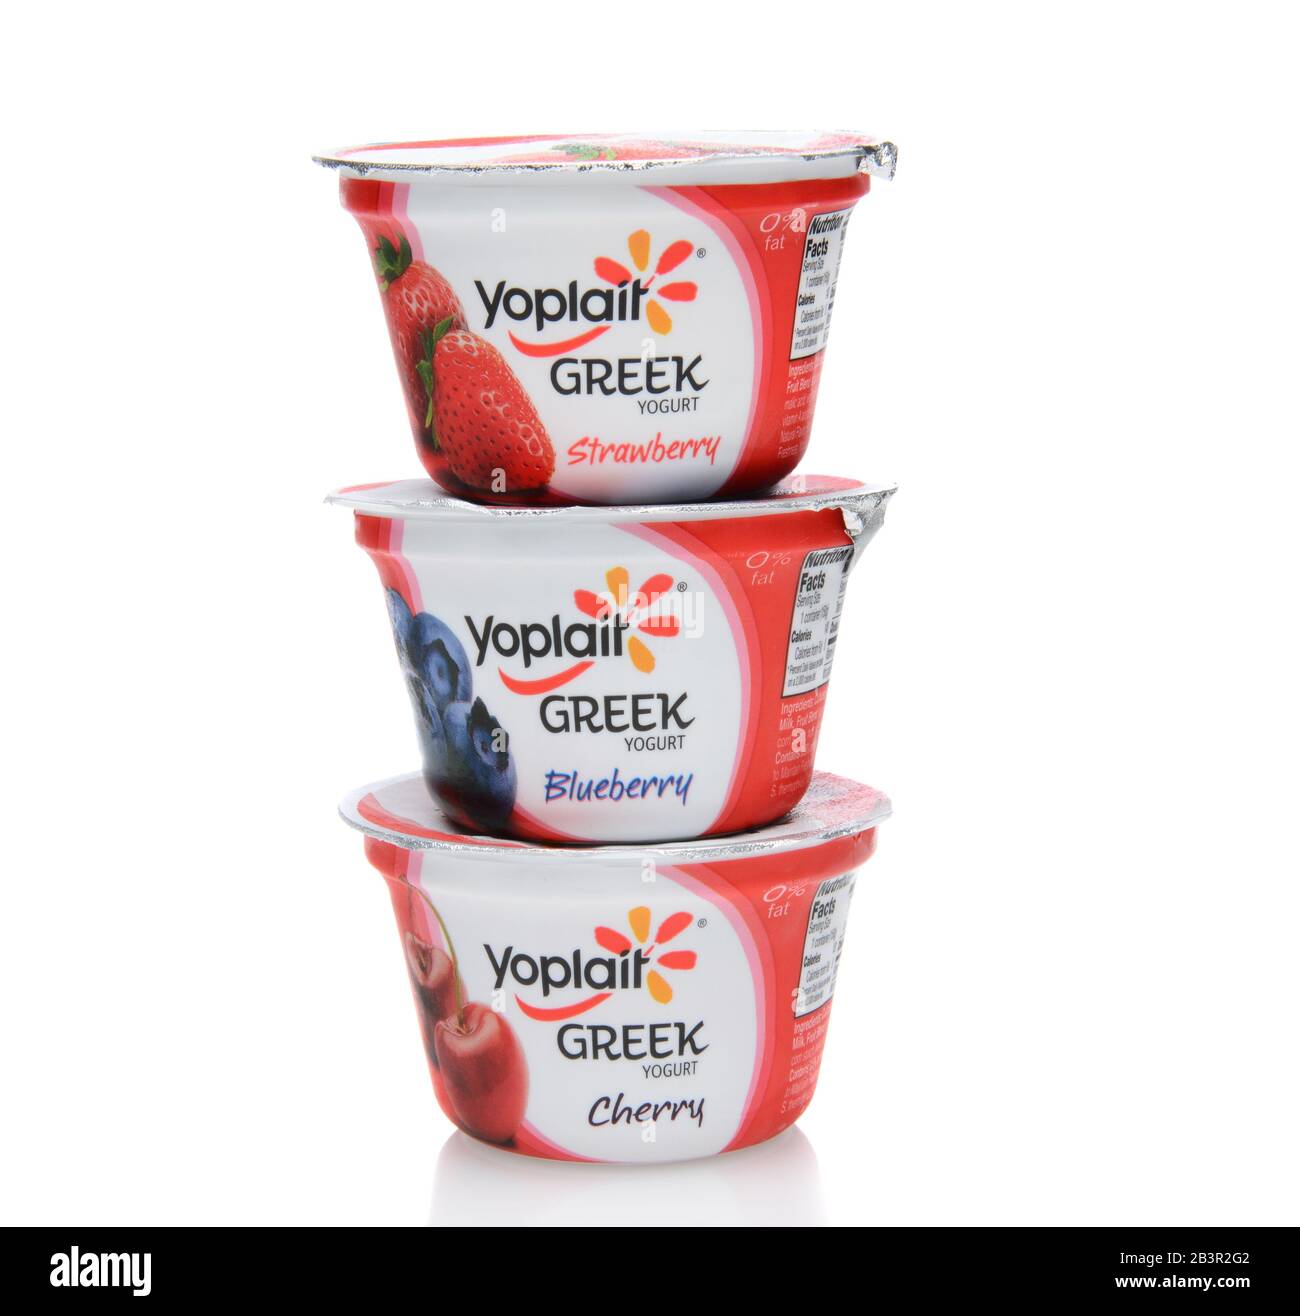 IRVINE, CA - SEPTEMBER 15, 2014: Three different containers of Yoplait Greek Yogurt. In 1965, two French dairy co-operatives, Yola and Coplait, merged Stock Photo